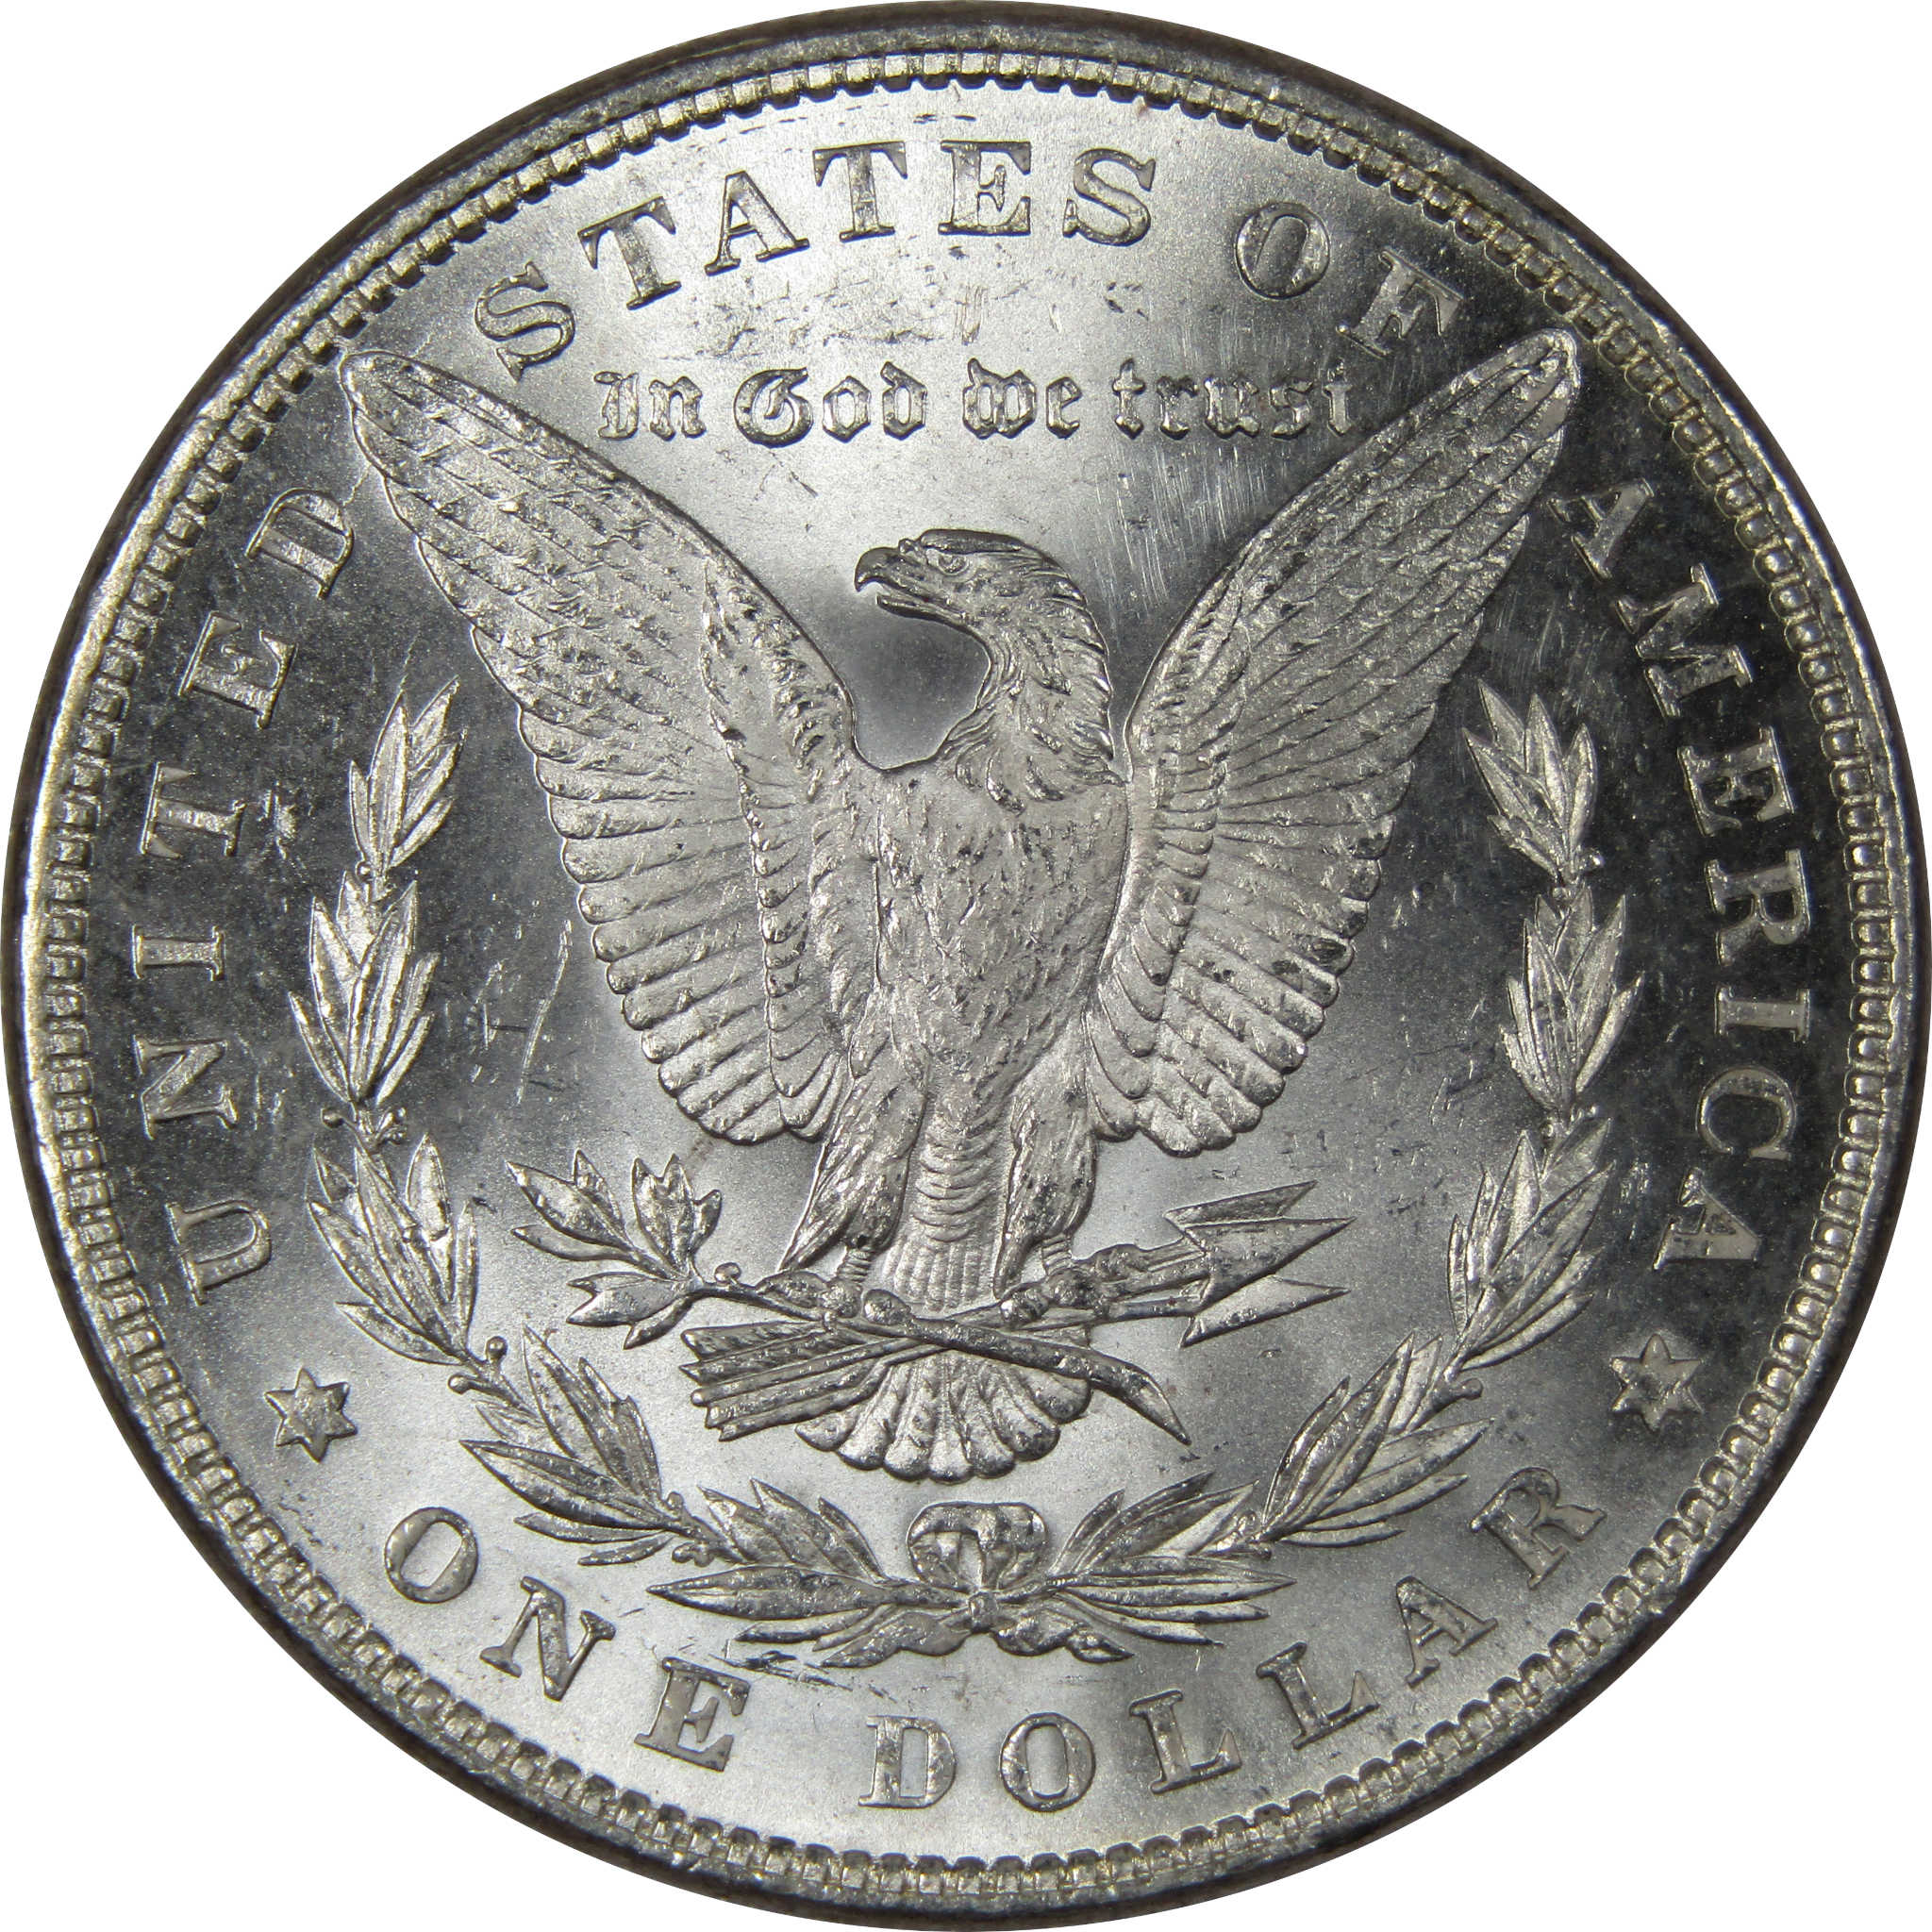 1882 Morgan Dollar BU Uncirculated Mint State 90% Silver SKU:IPC9644 - Morgan coin - Morgan silver dollar - Morgan silver dollar for sale - Profile Coins &amp; Collectibles